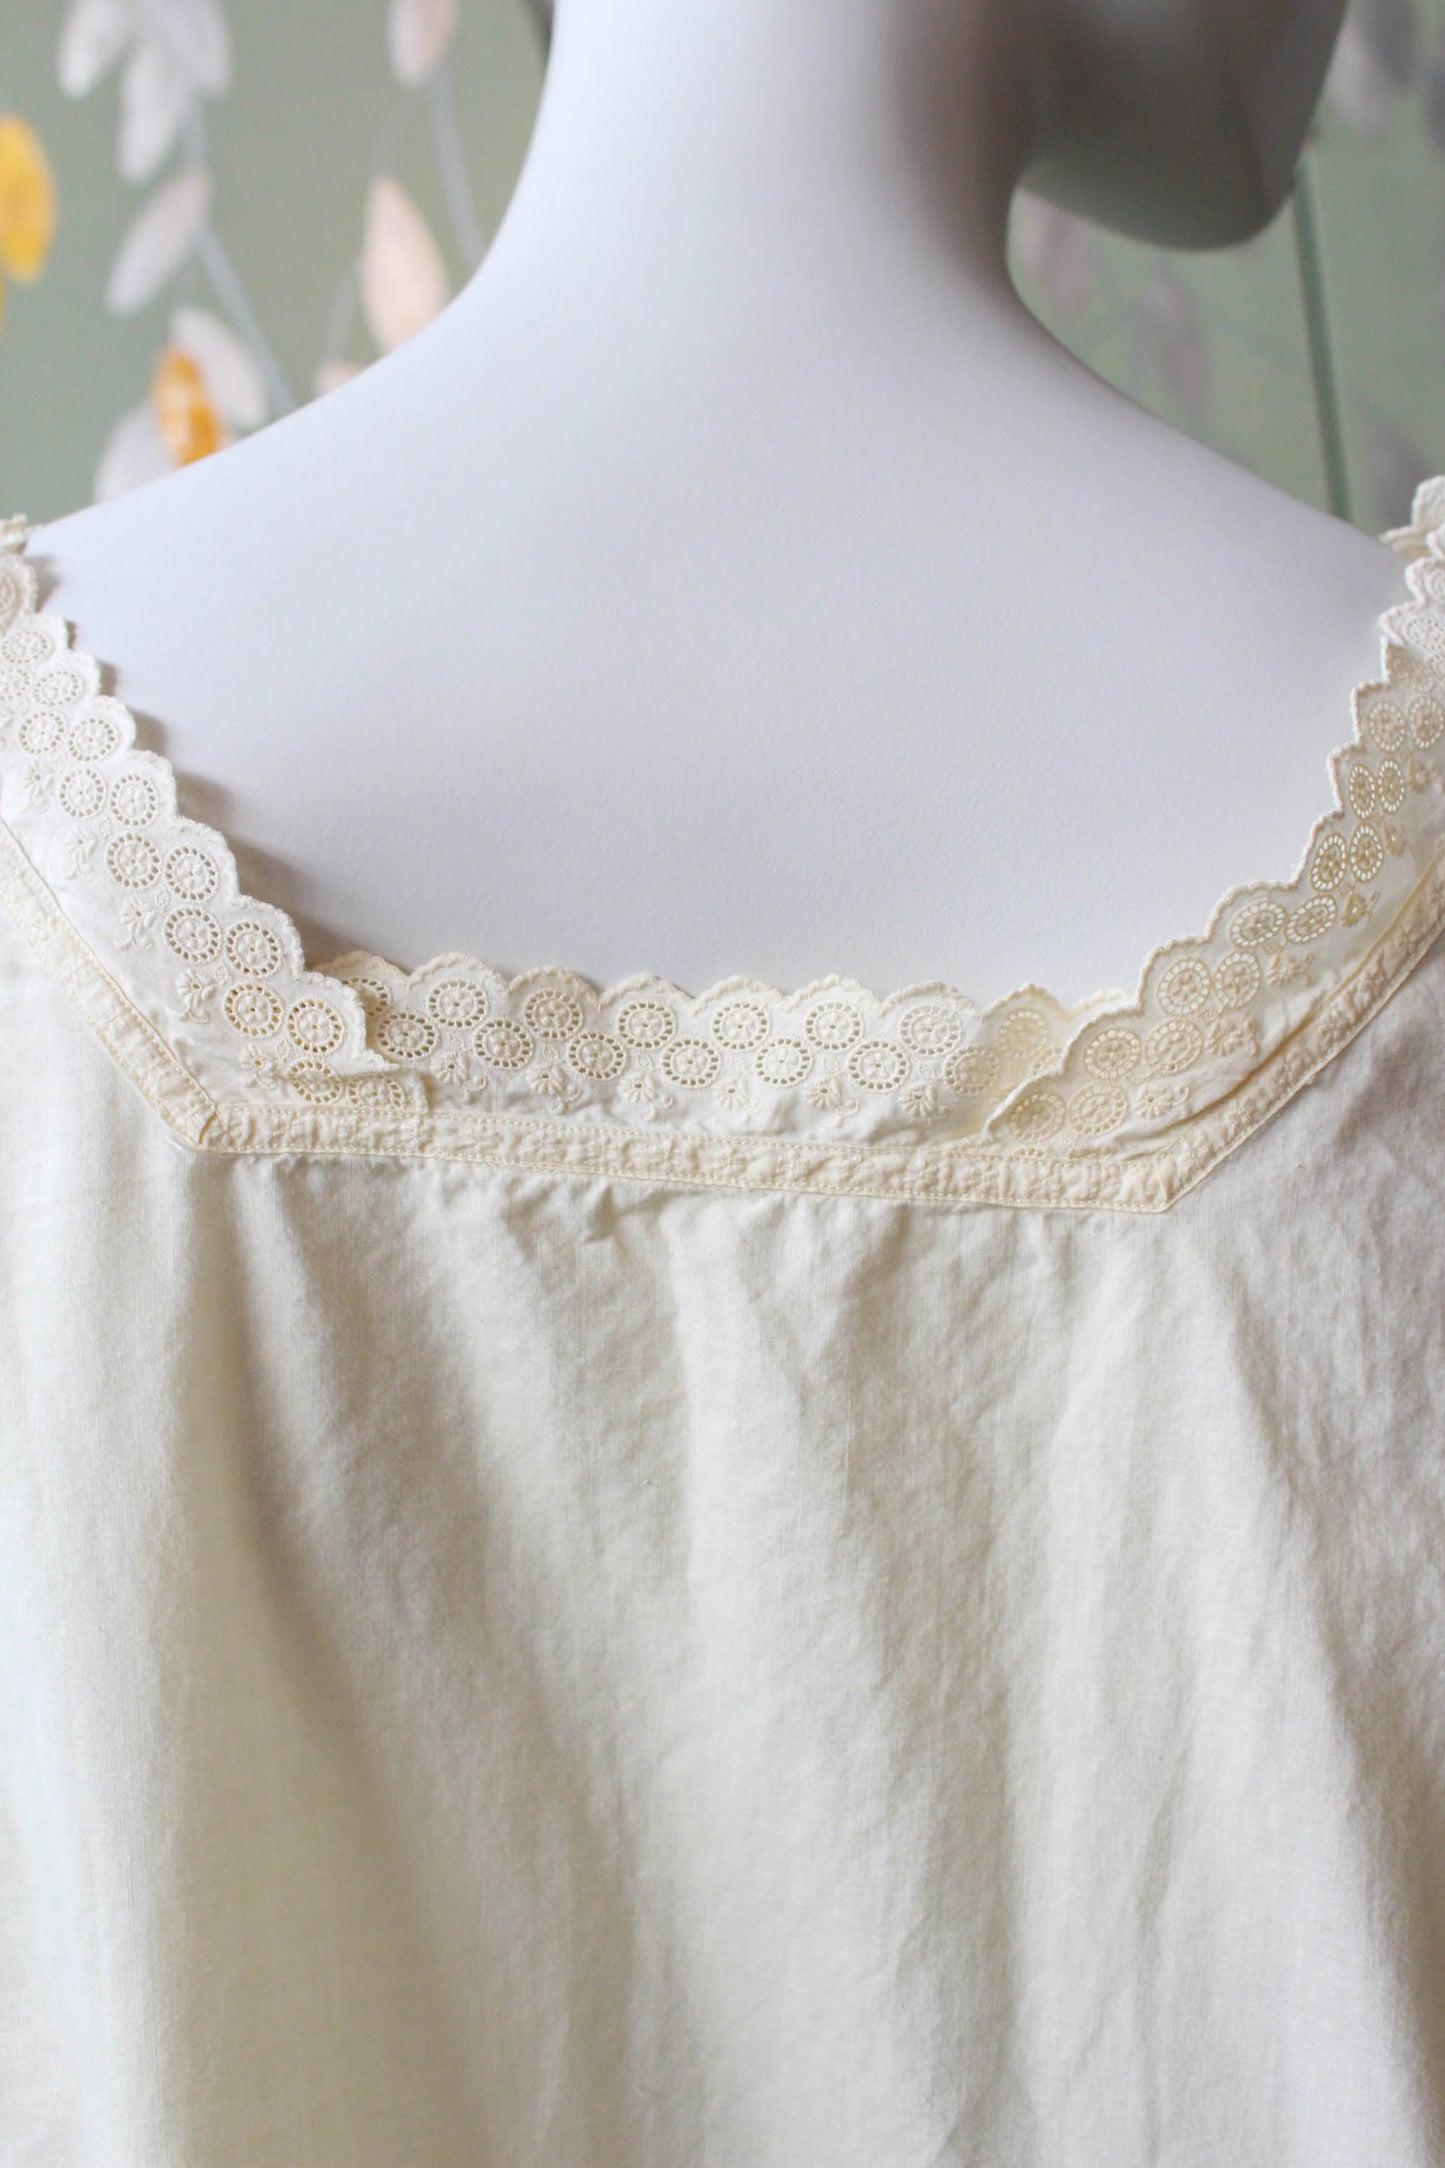 Antique White Cotton Nightgown with Circle Eyelet Trim, Large